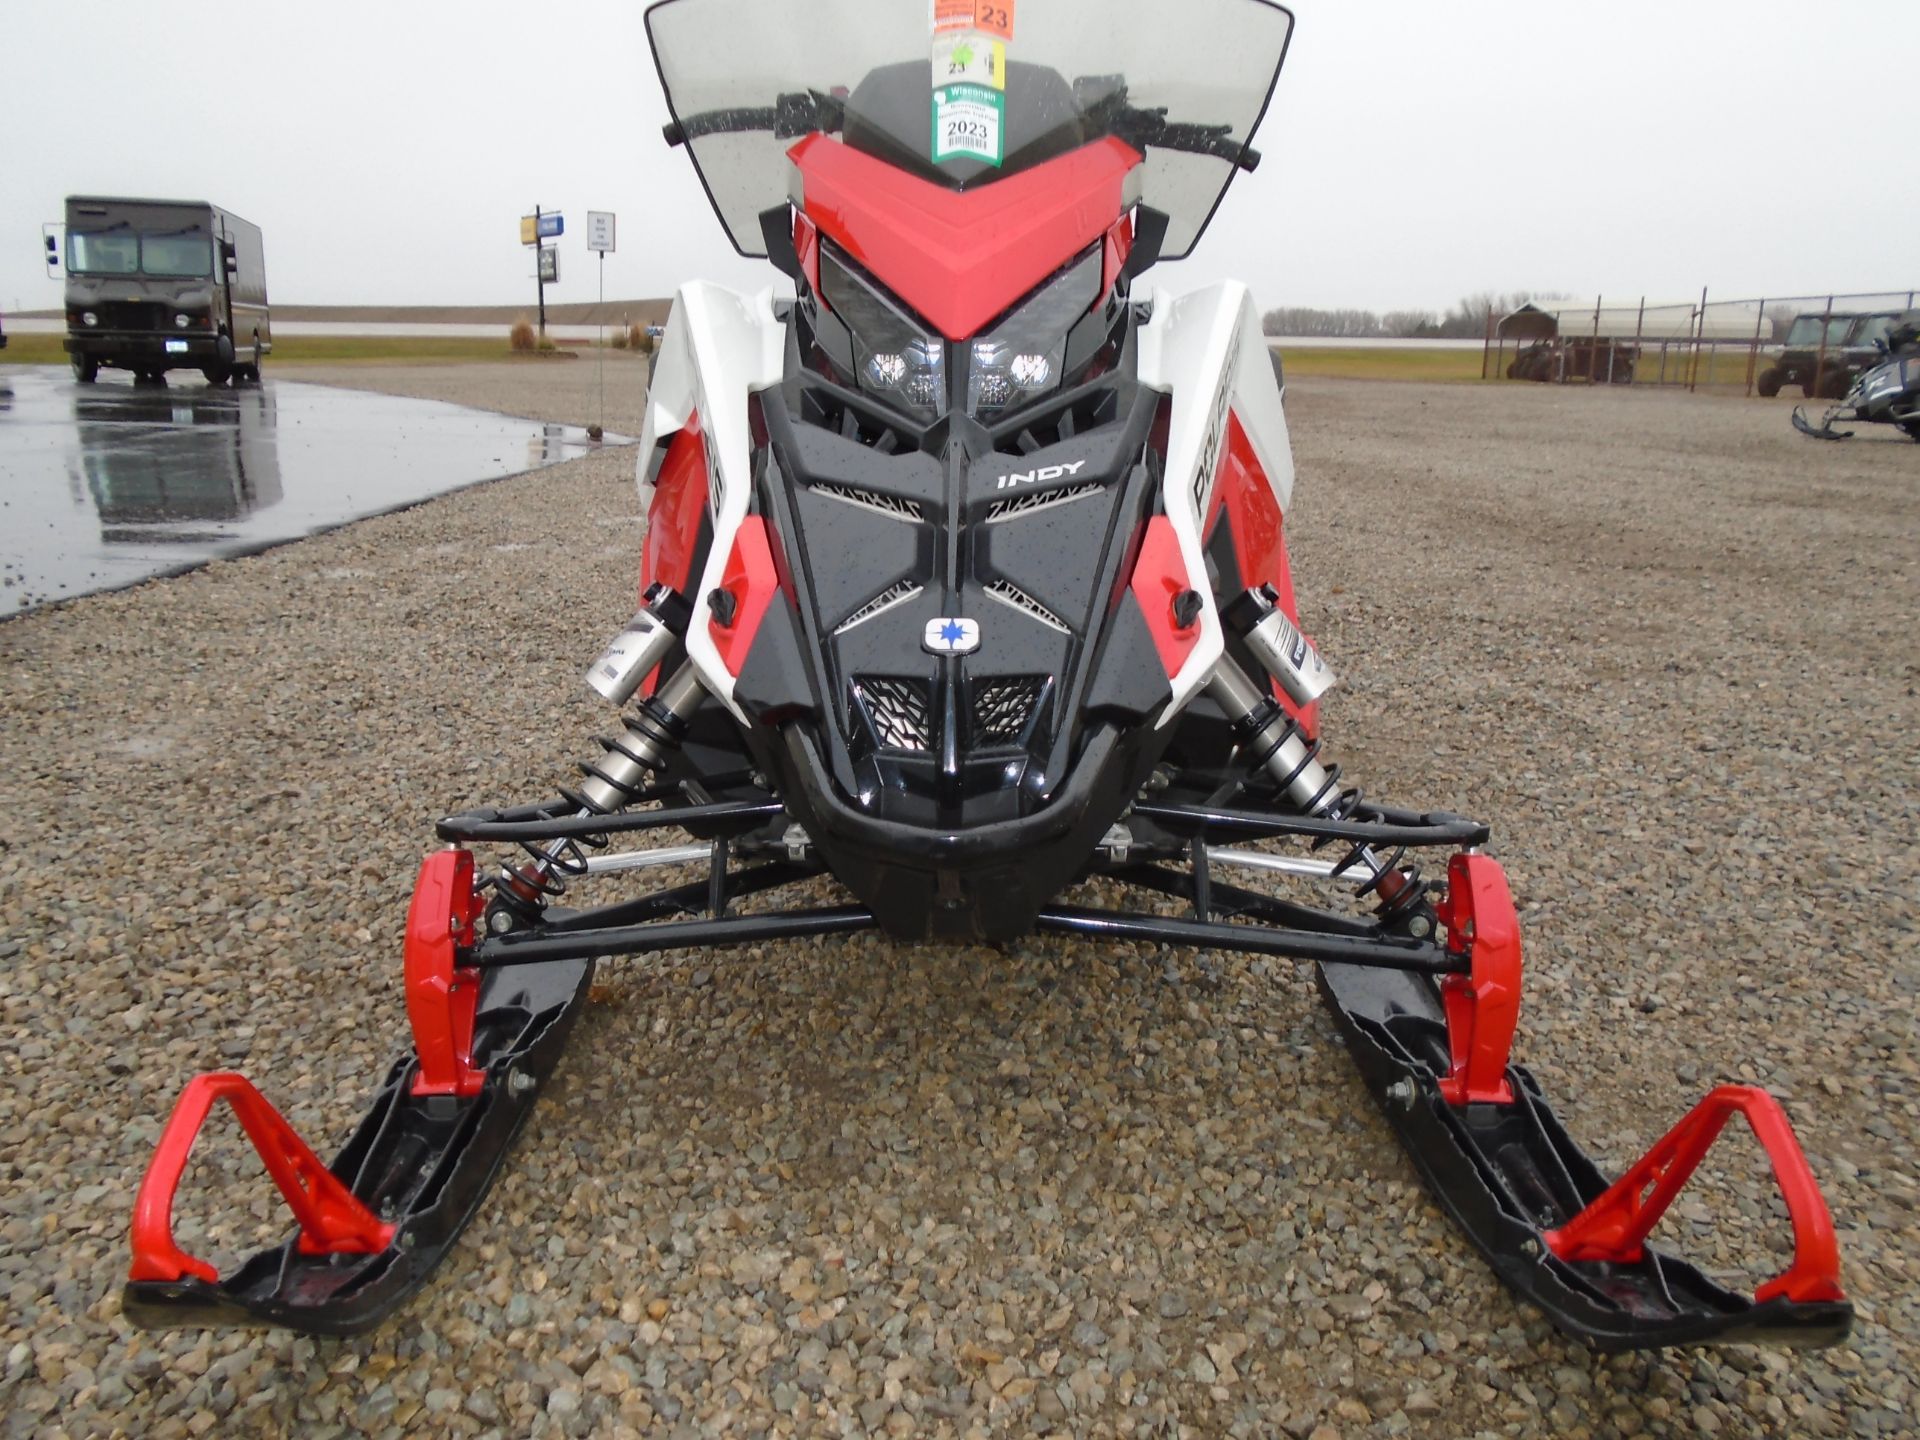 2021 Polaris 850 Indy XC 129 Launch Edition Factory Choice in Lake Mills, Iowa - Photo 2